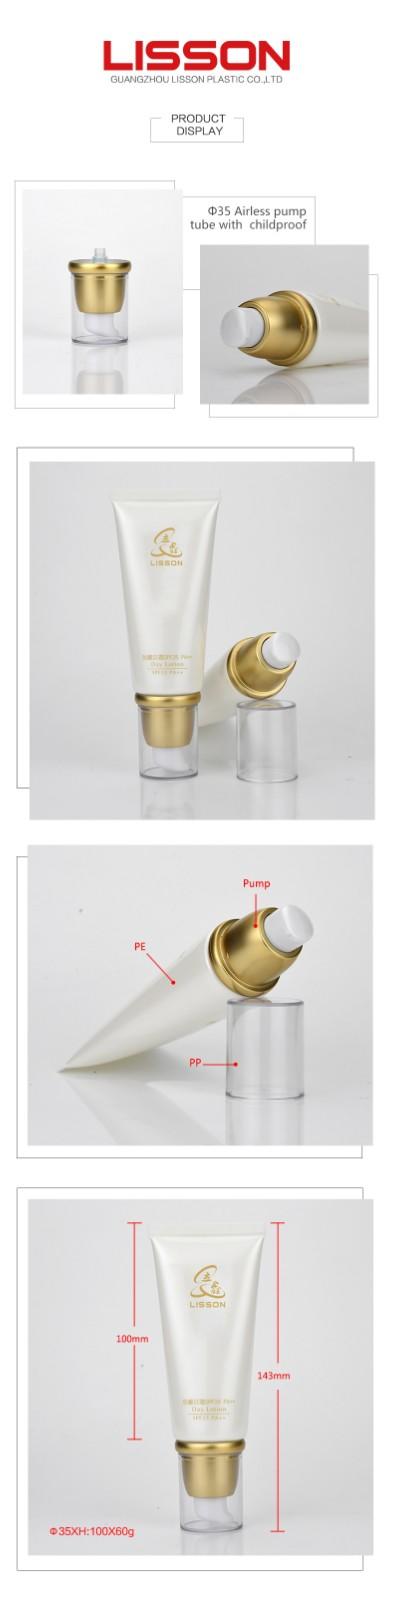 airless pump bottles packaging laminated for cosmetic-1